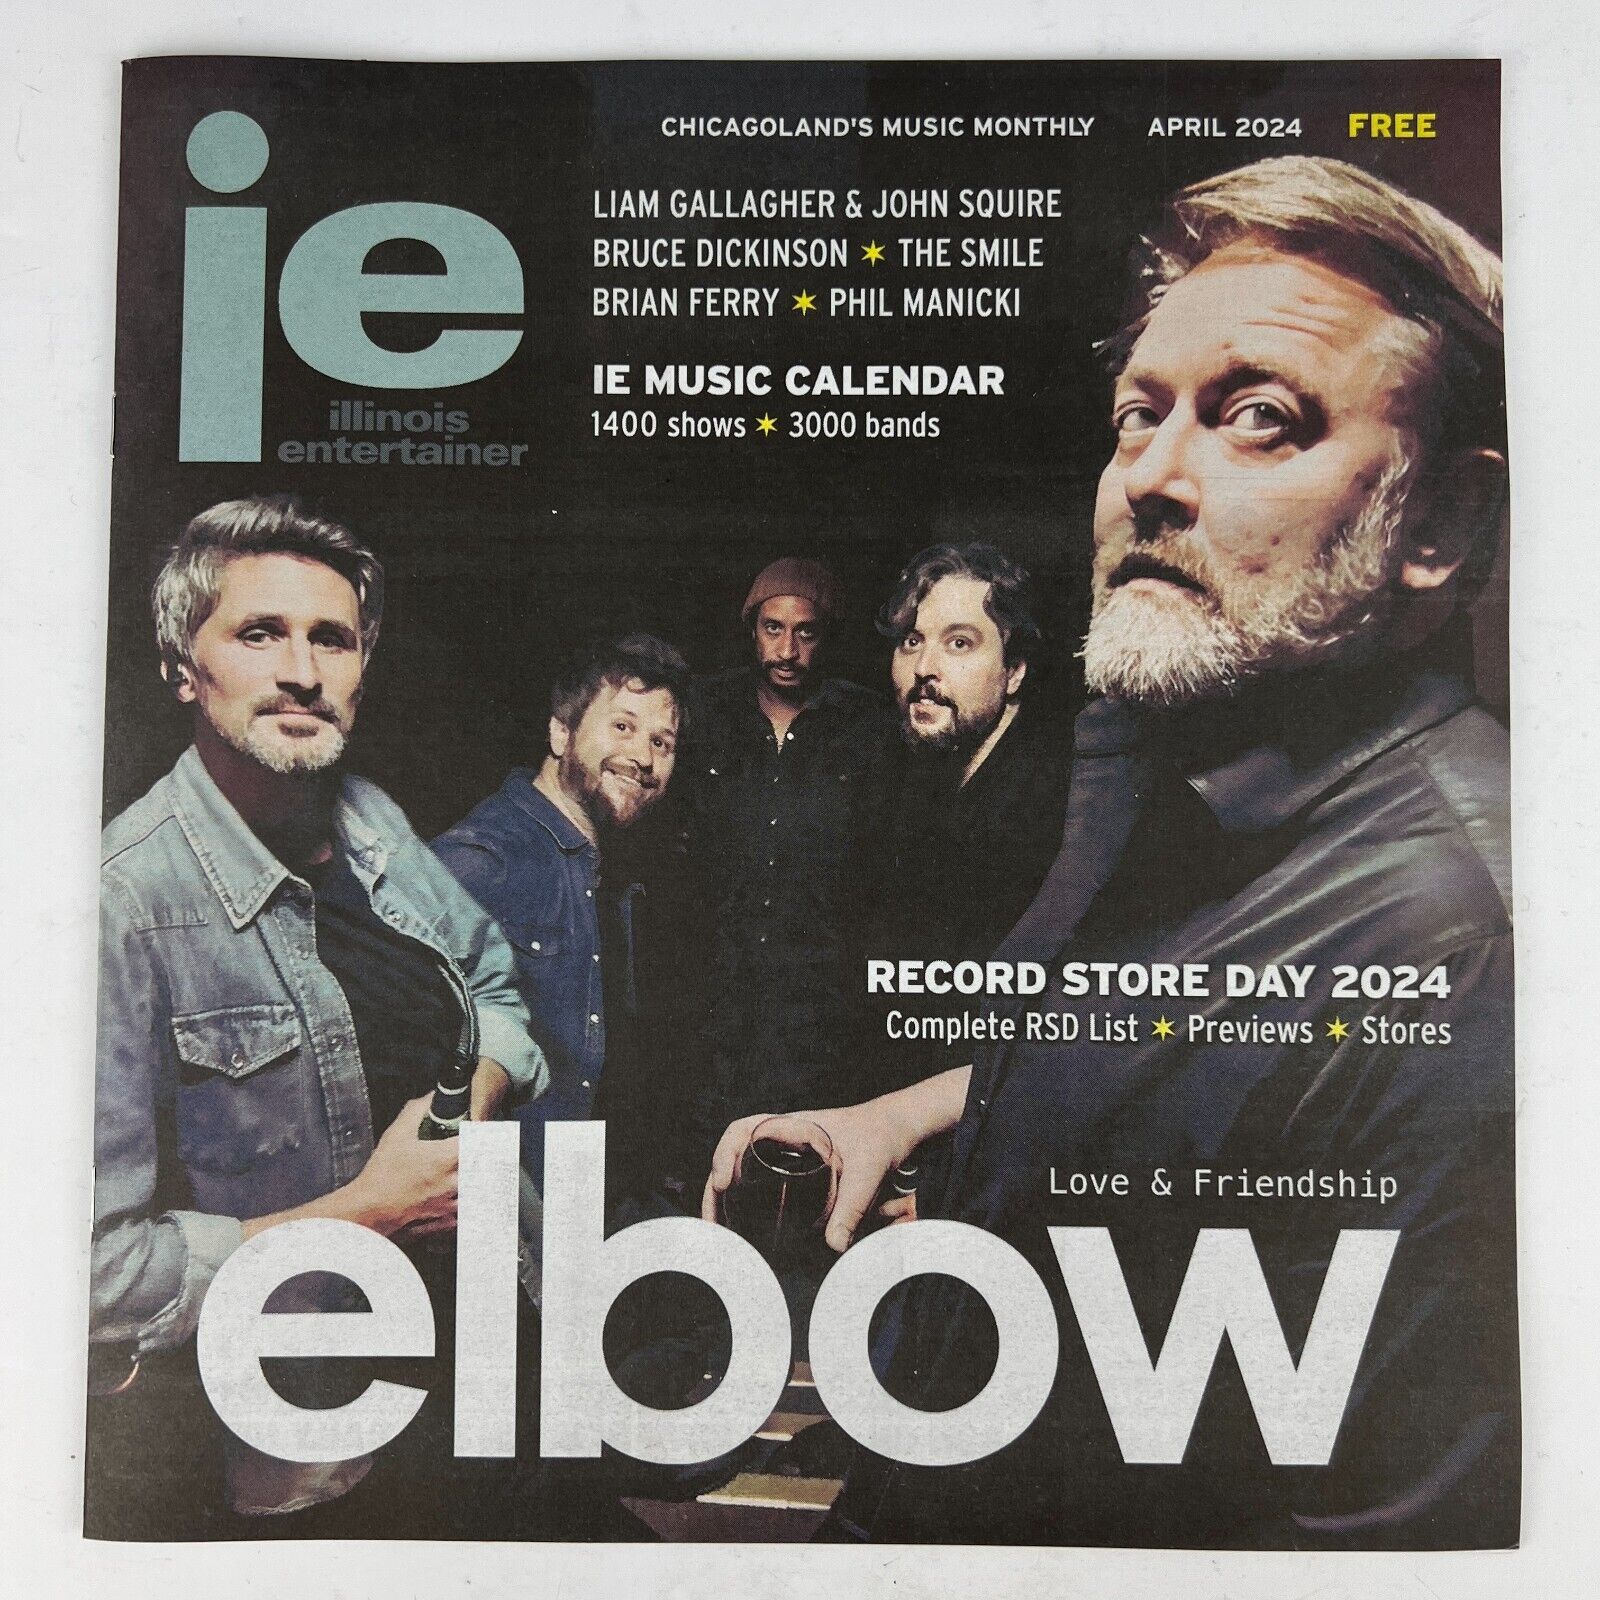 Primary image for Illinois Entertainer April 2024 elbow Band Cover plus Local Guide